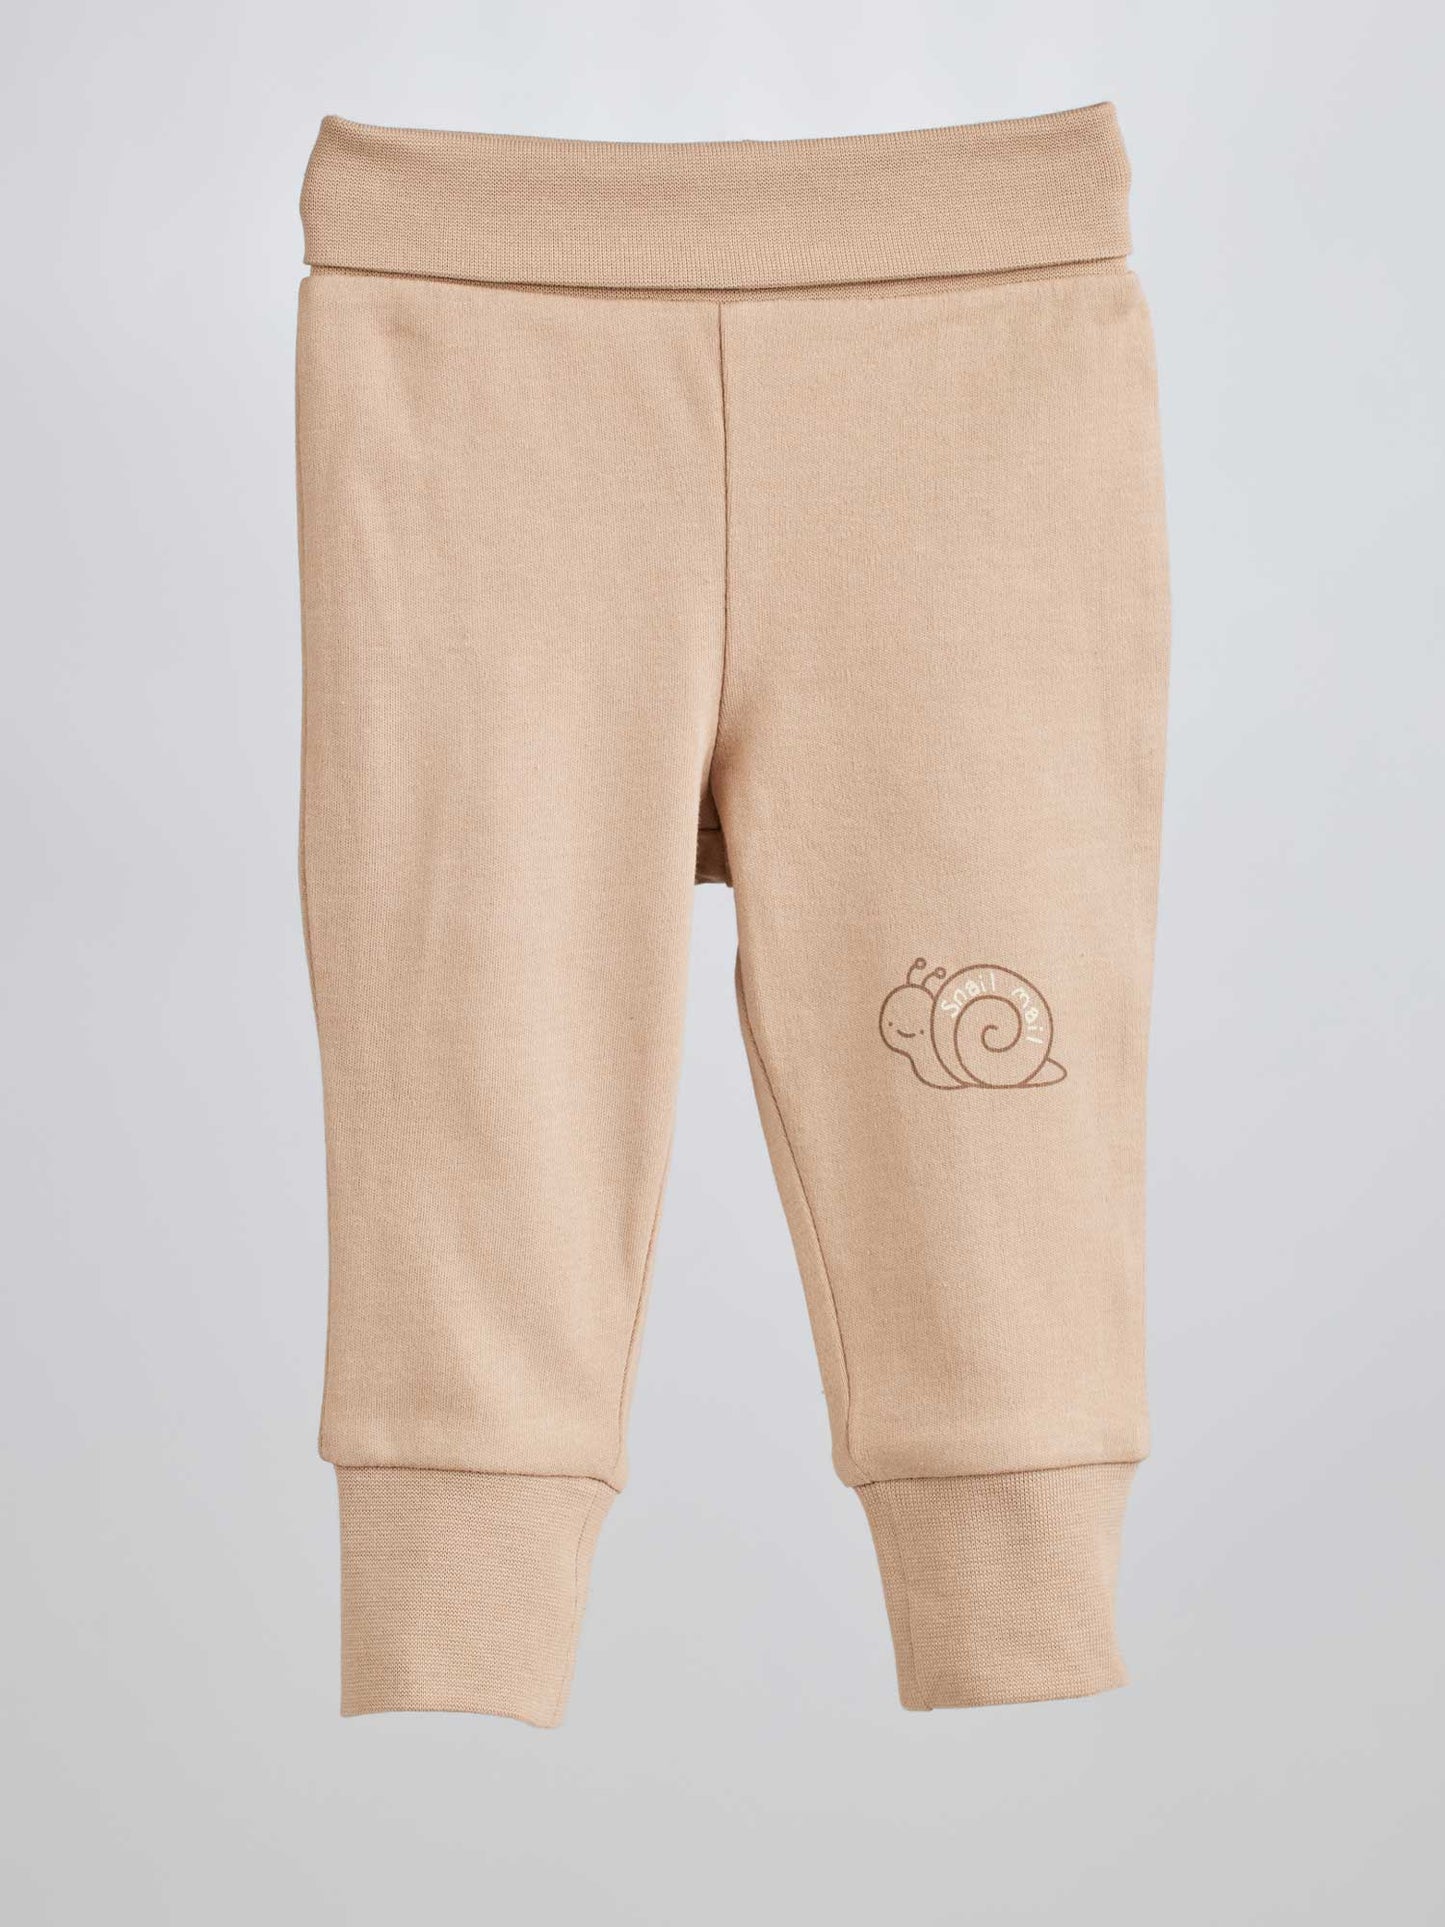 The snail pants 280 for newborn are very comfortable for the little ones. Made from 100% quality cotton, with snail print and warm collors, the infant pants allow your child to move easily and feel nice and warm while wearing it.